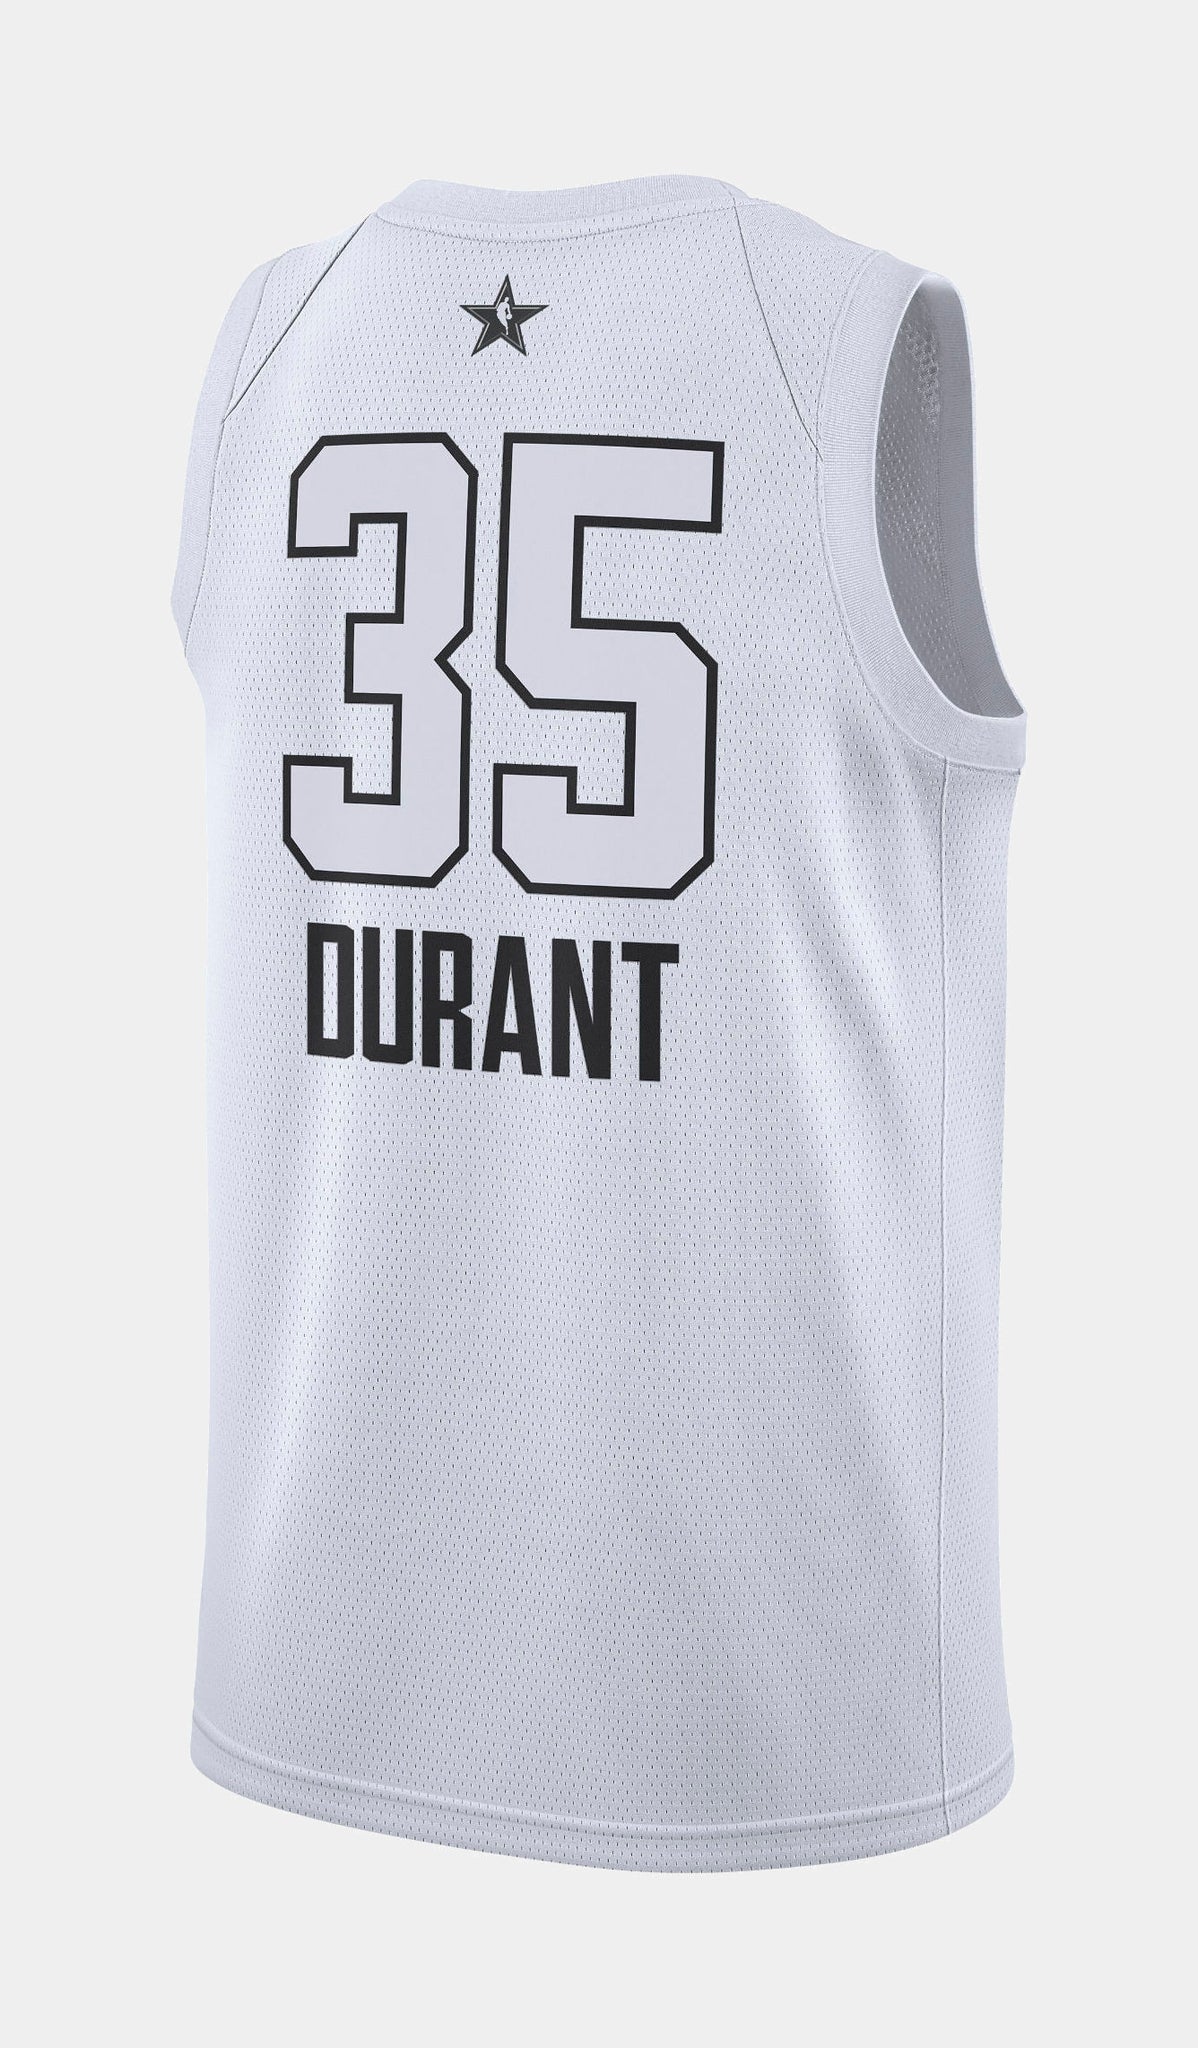 kevin durant all star jersey